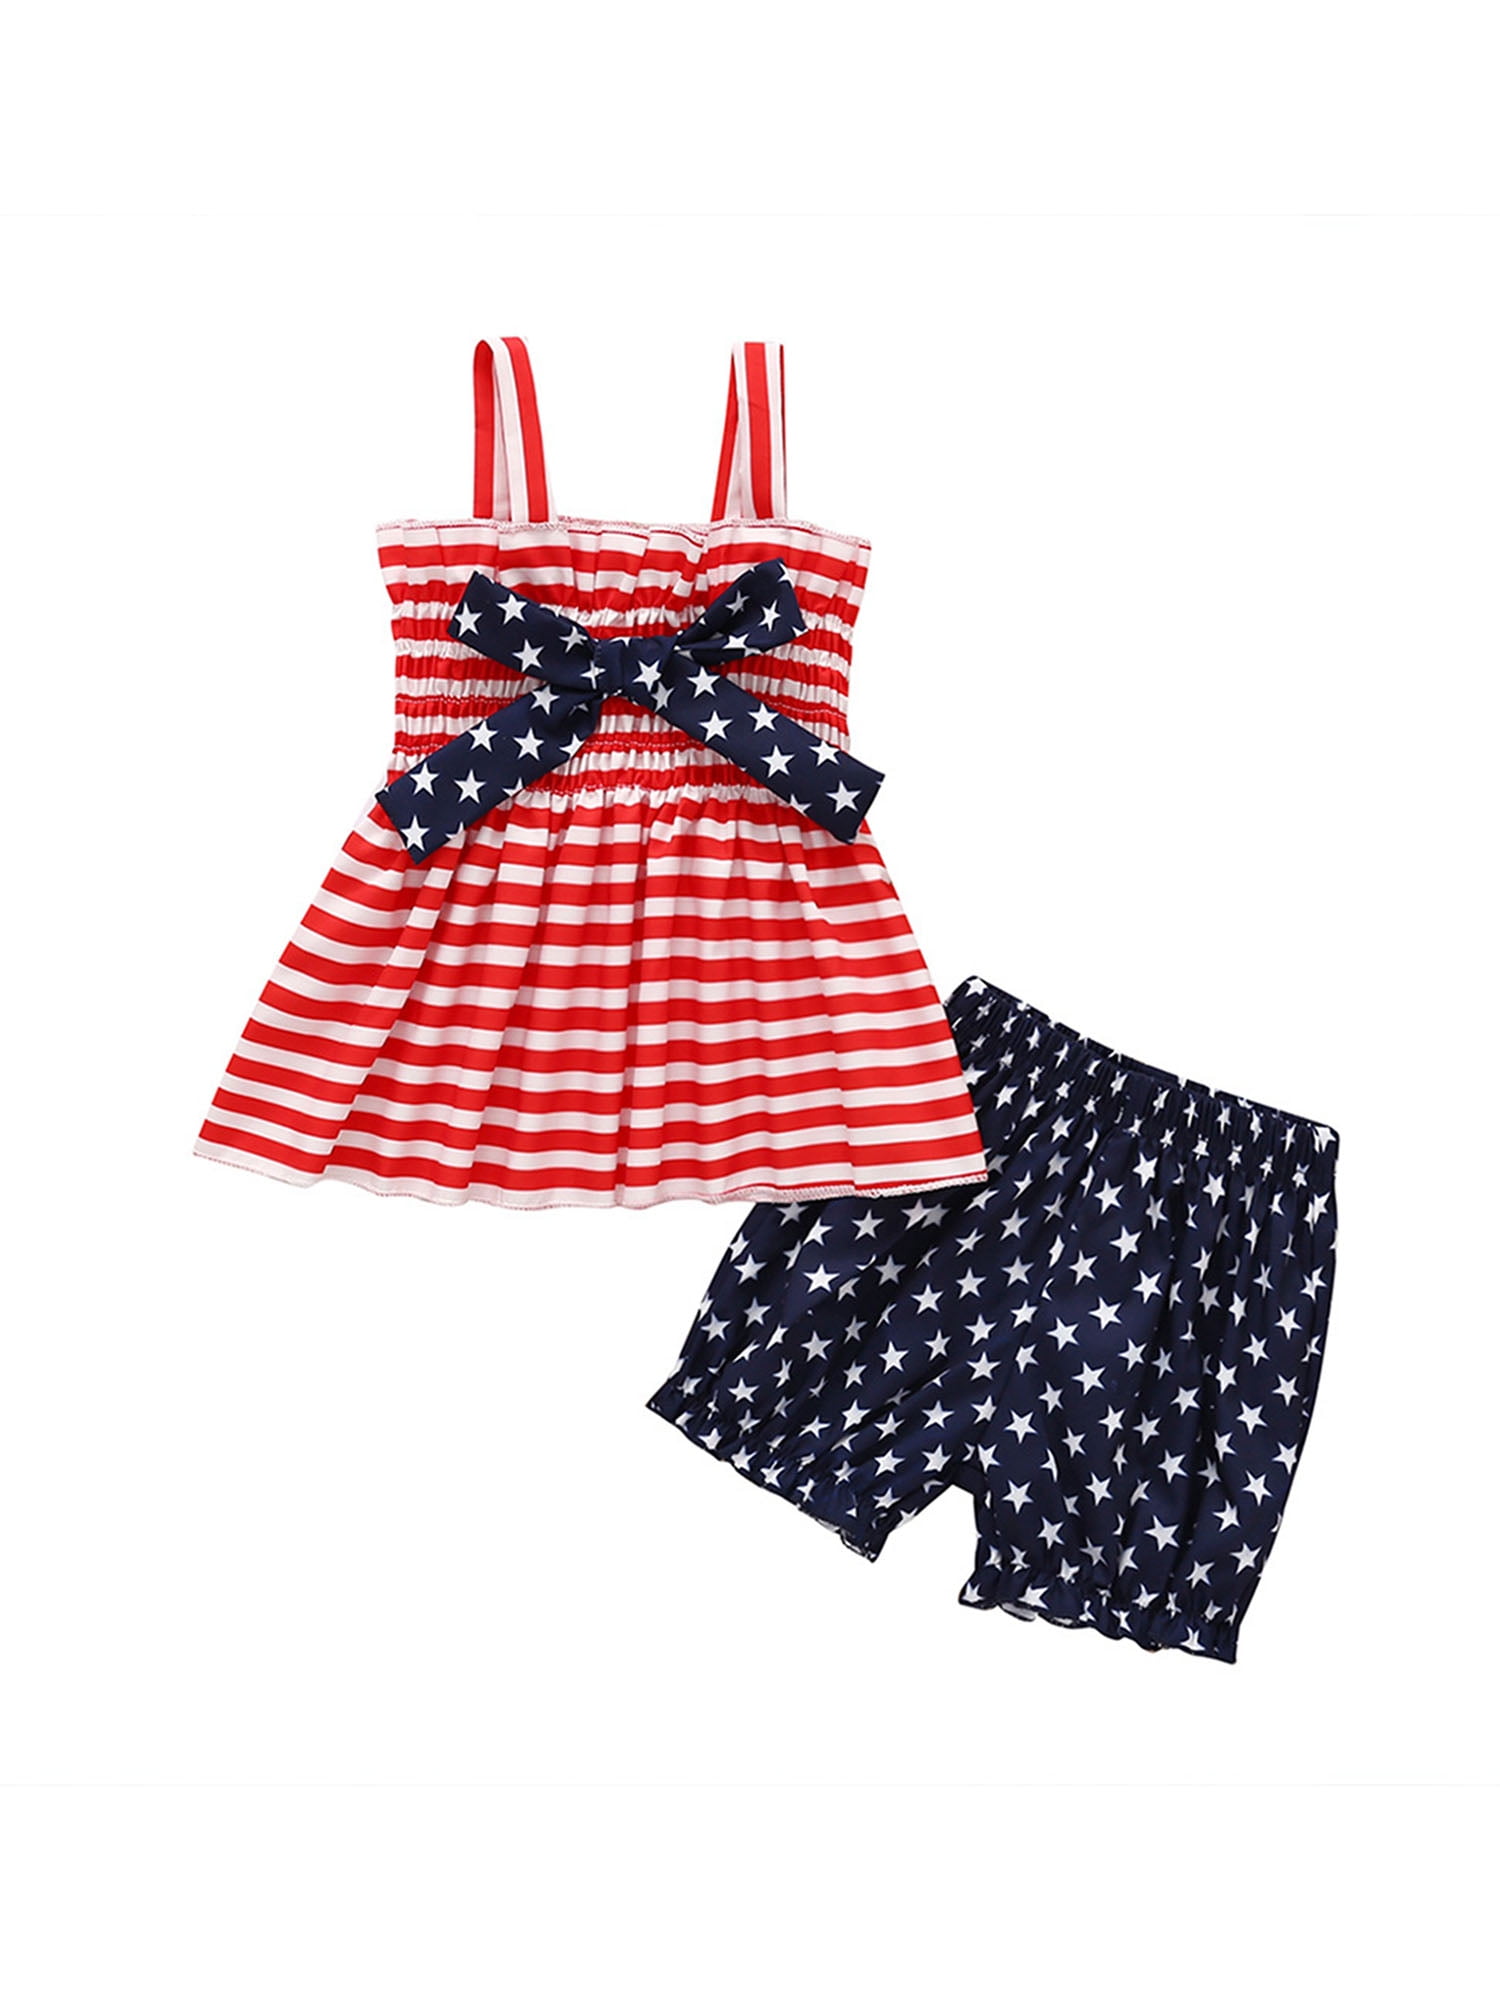 American Flag Stars Stripe Shorts Pants Independence Day Outfit Clothes Baby 4th of July Shorts Set Black Camisole